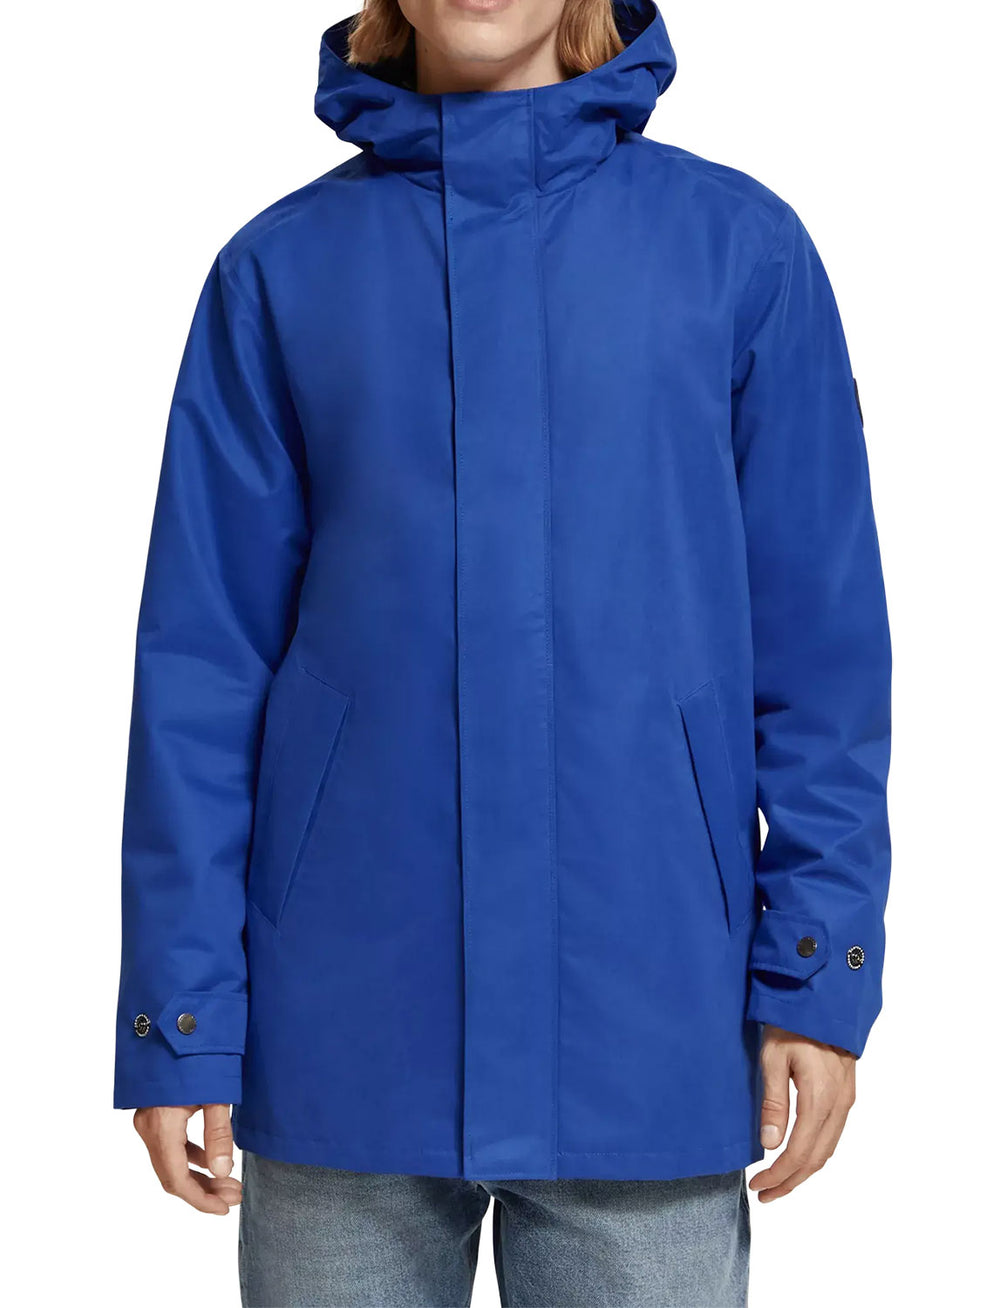 Scotch & Soda - Technical Raincoat in Boat Blue | Buster McGee